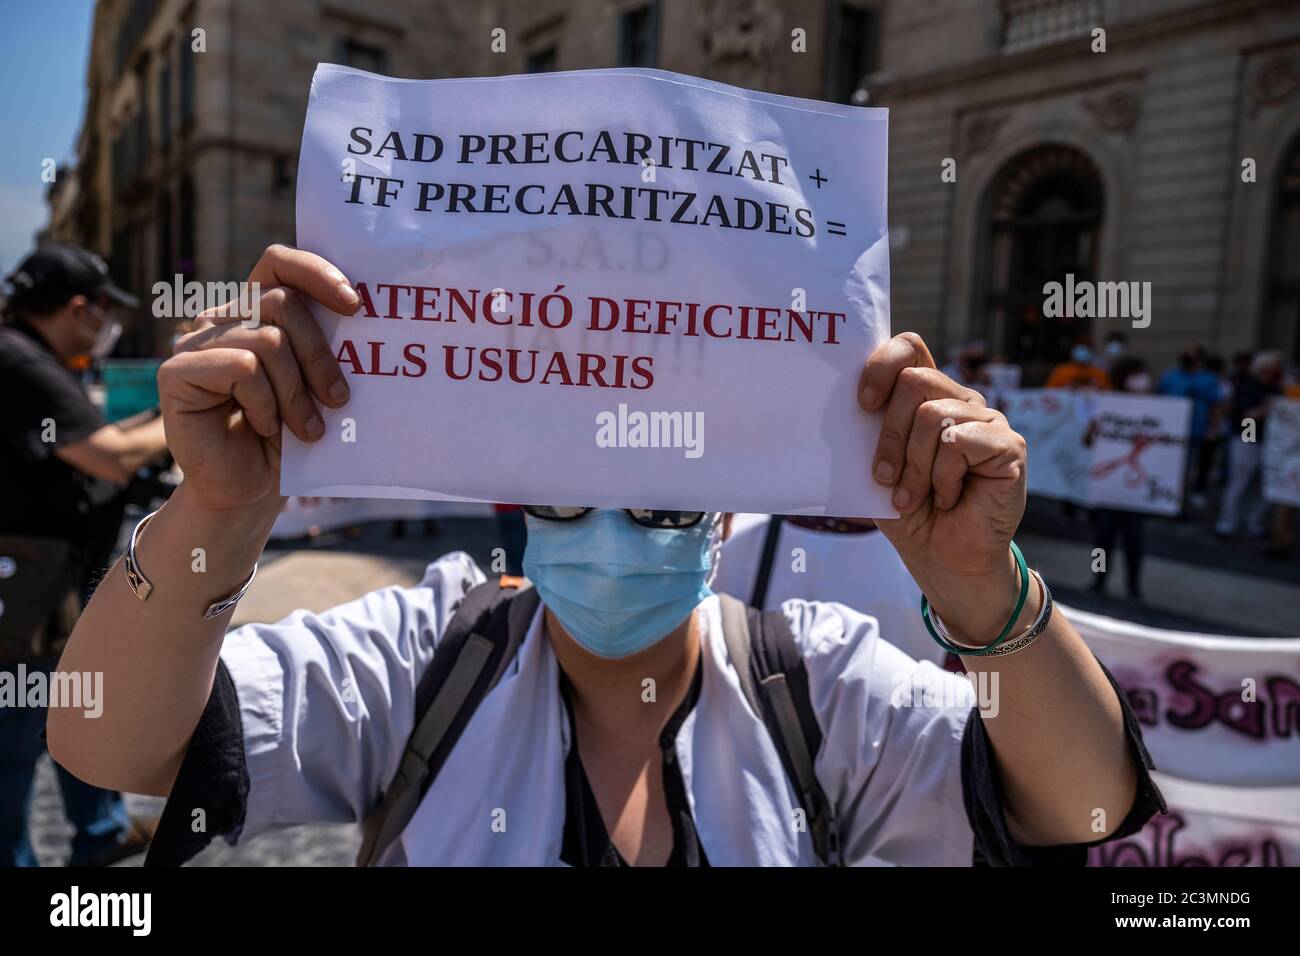 A protester wearing a facemask is seen showing a placard denouncing poor attention from public health services.Convened by the Marea Blanca collective, workers and users of public health have demonstrated against privatization and for the right to public health that truly serves people. Stock Photo